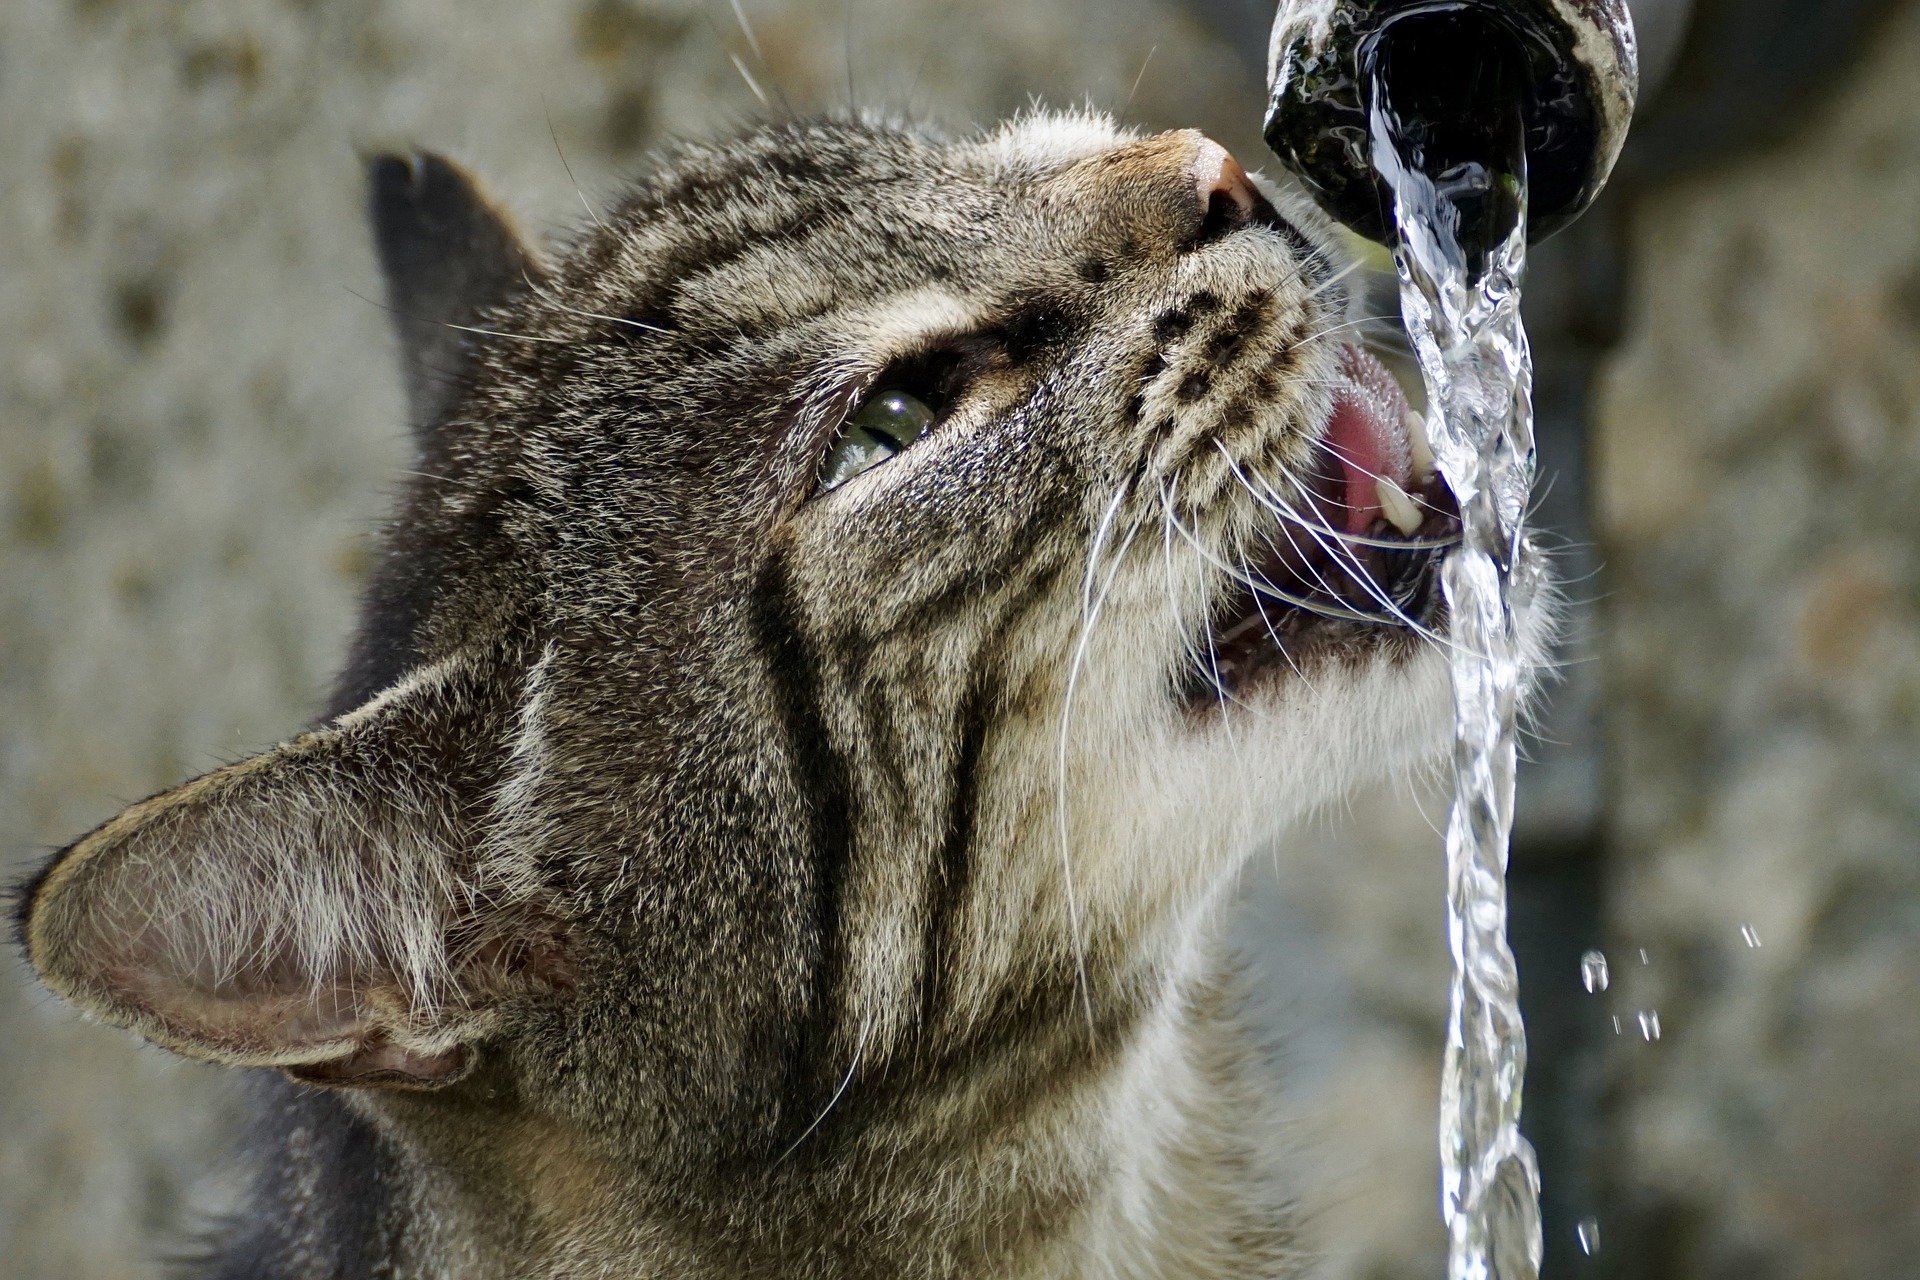 cat drinks water from a source very healthy